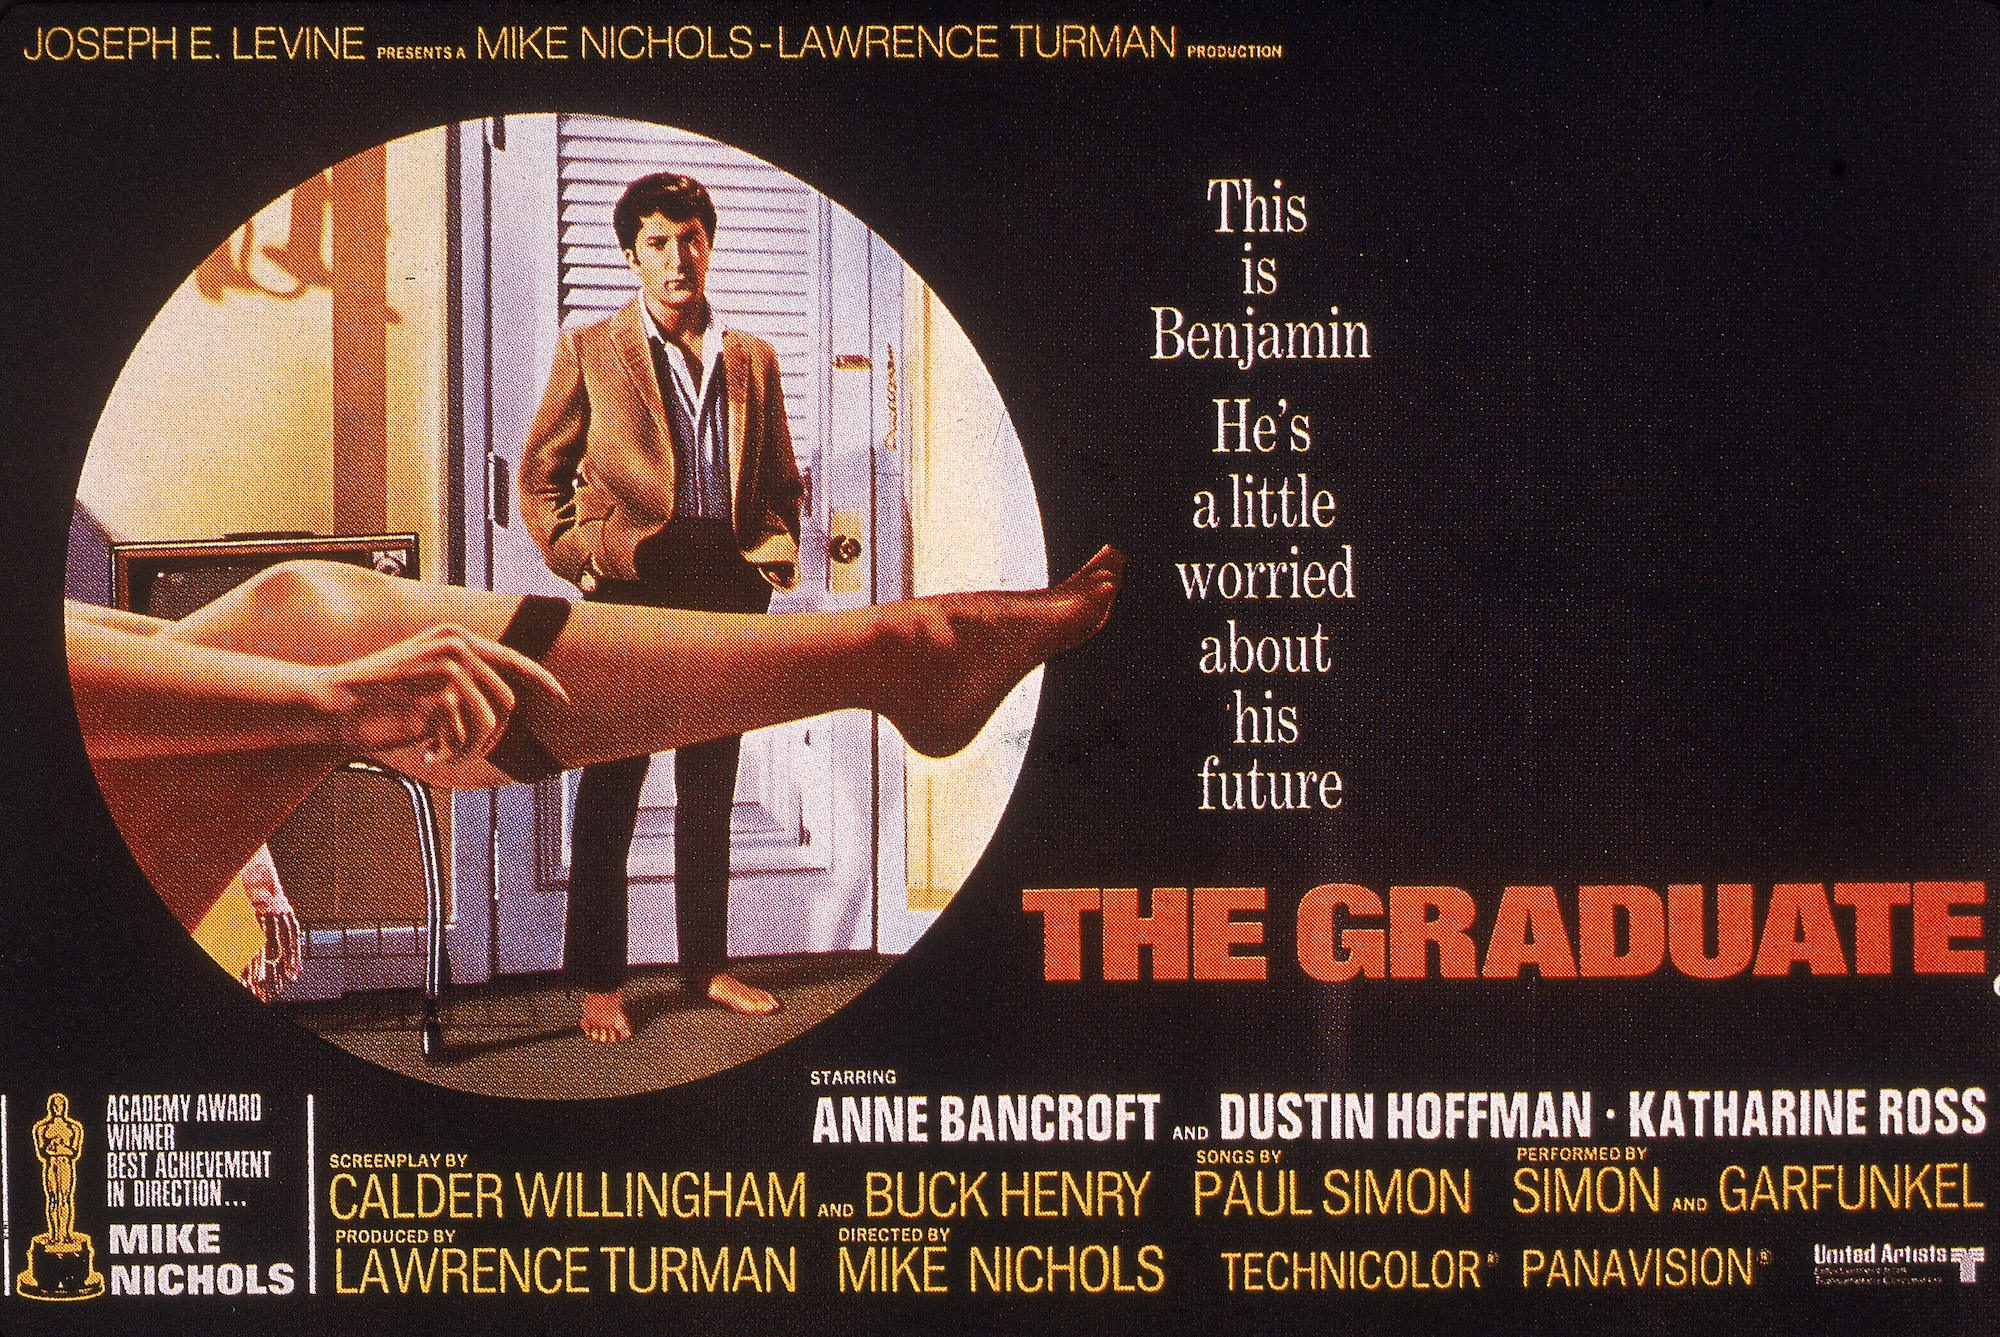 Film Poster For 'The Graduate'